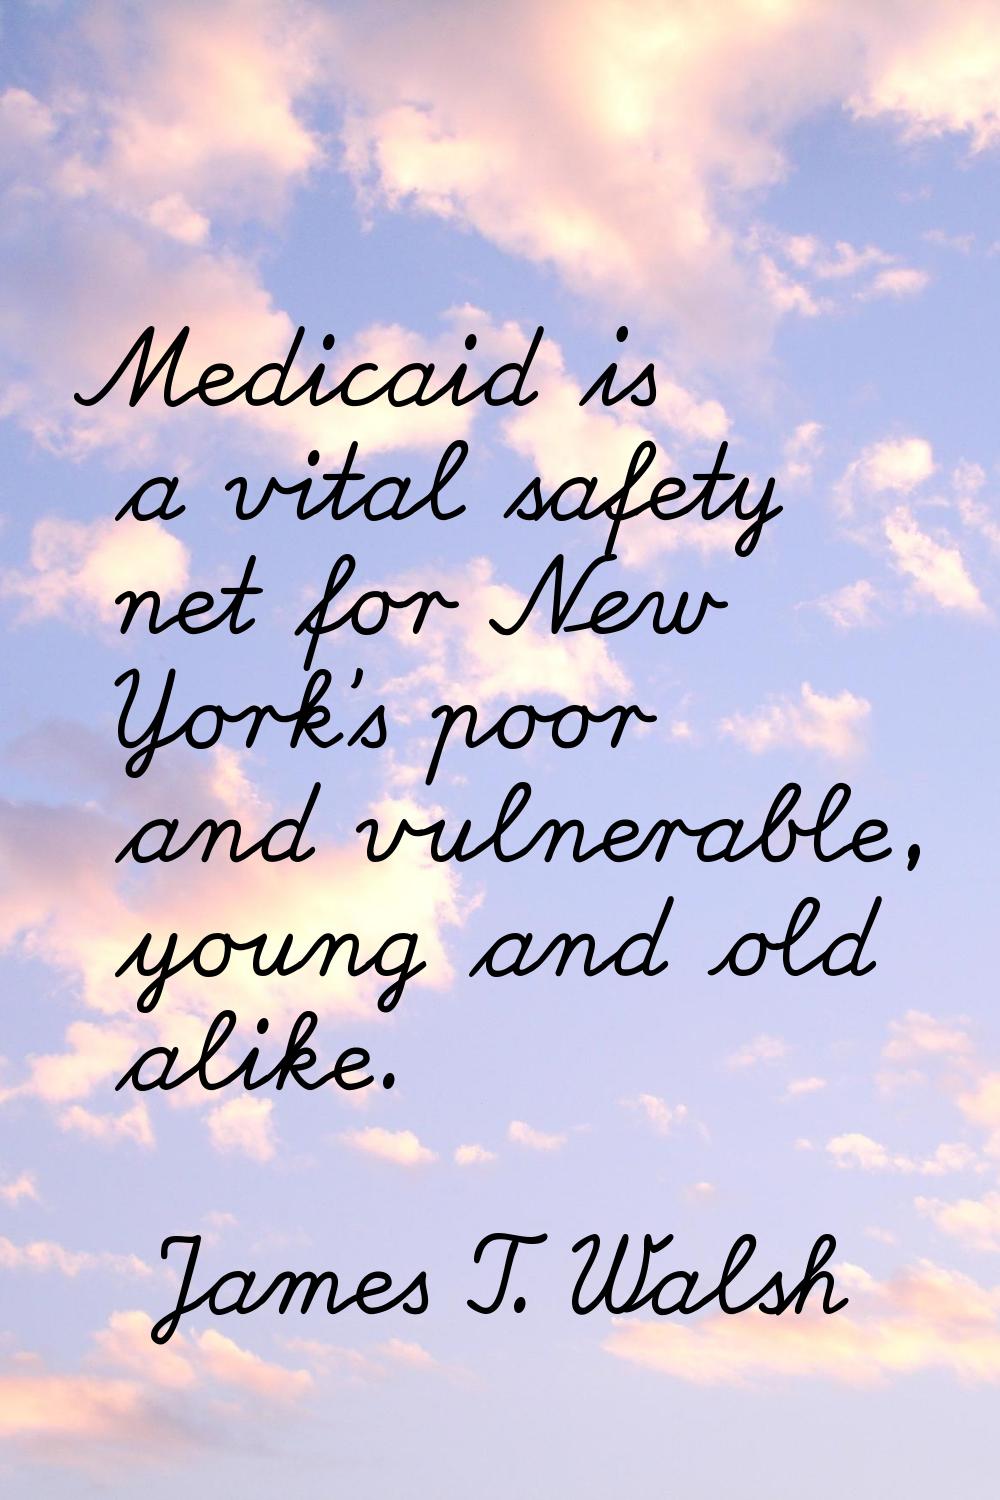 Medicaid is a vital safety net for New York's poor and vulnerable, young and old alike.